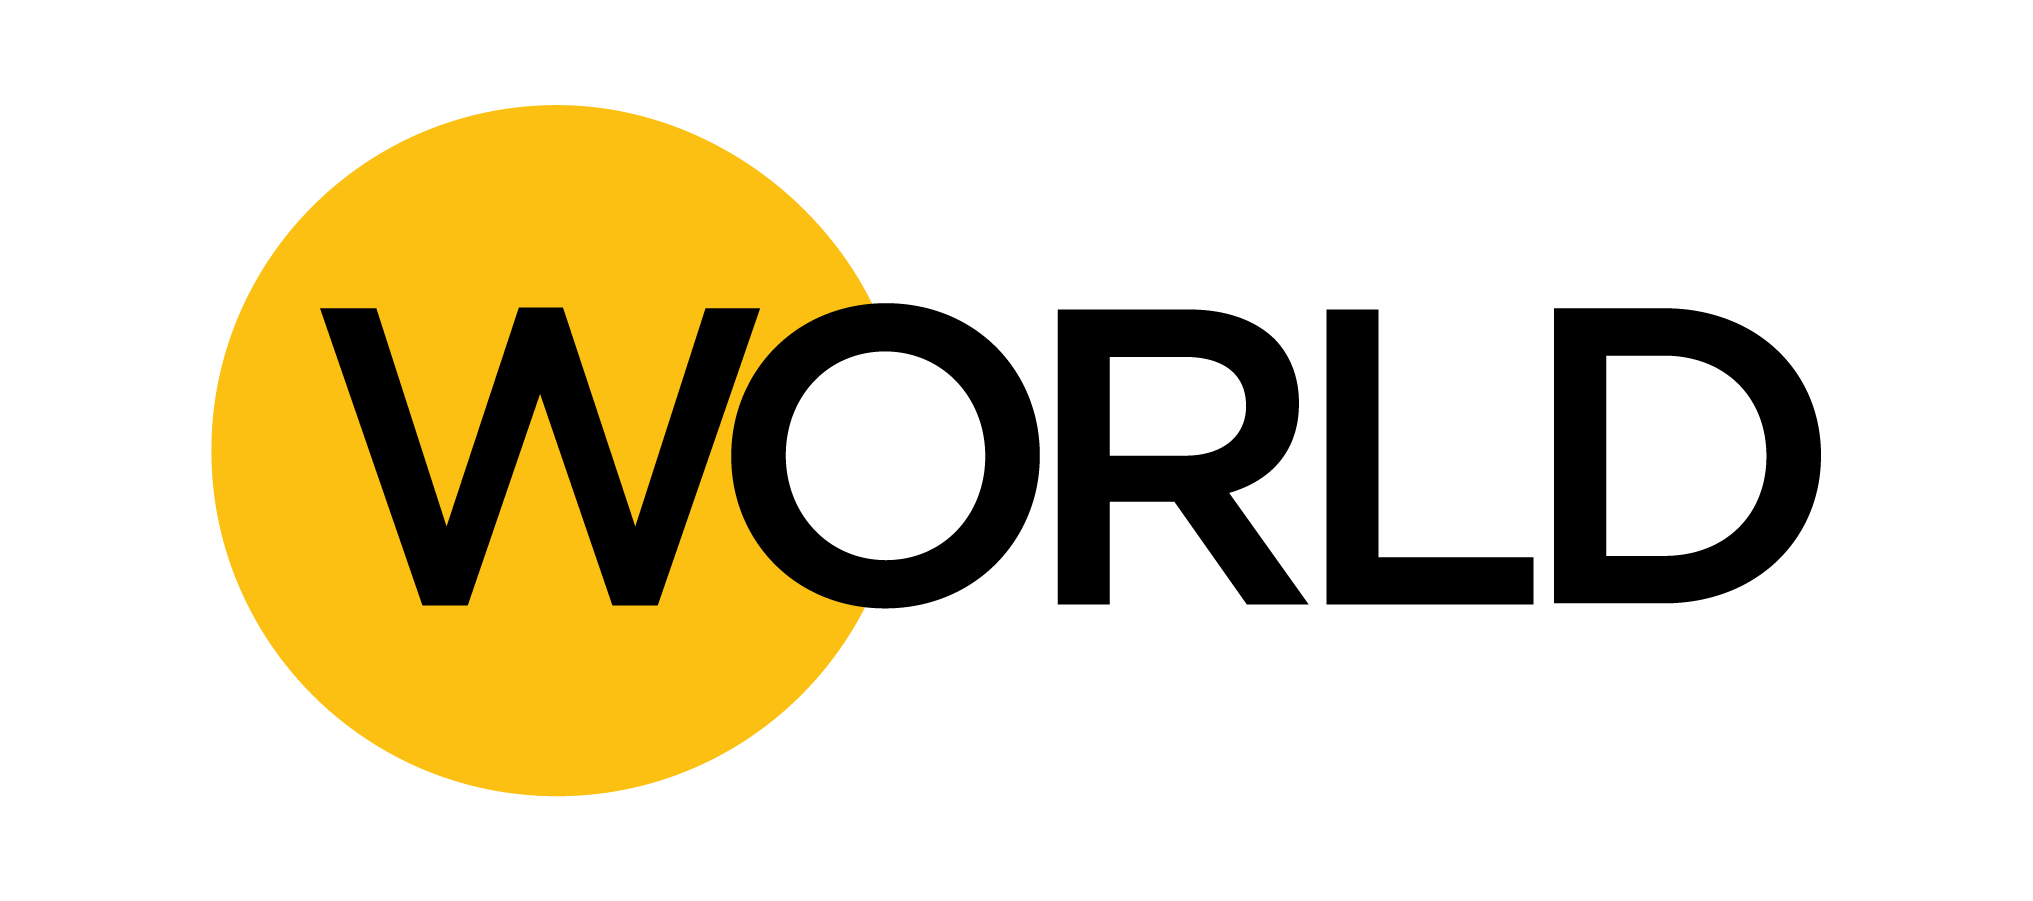 A yellow and black world logo on a white background.